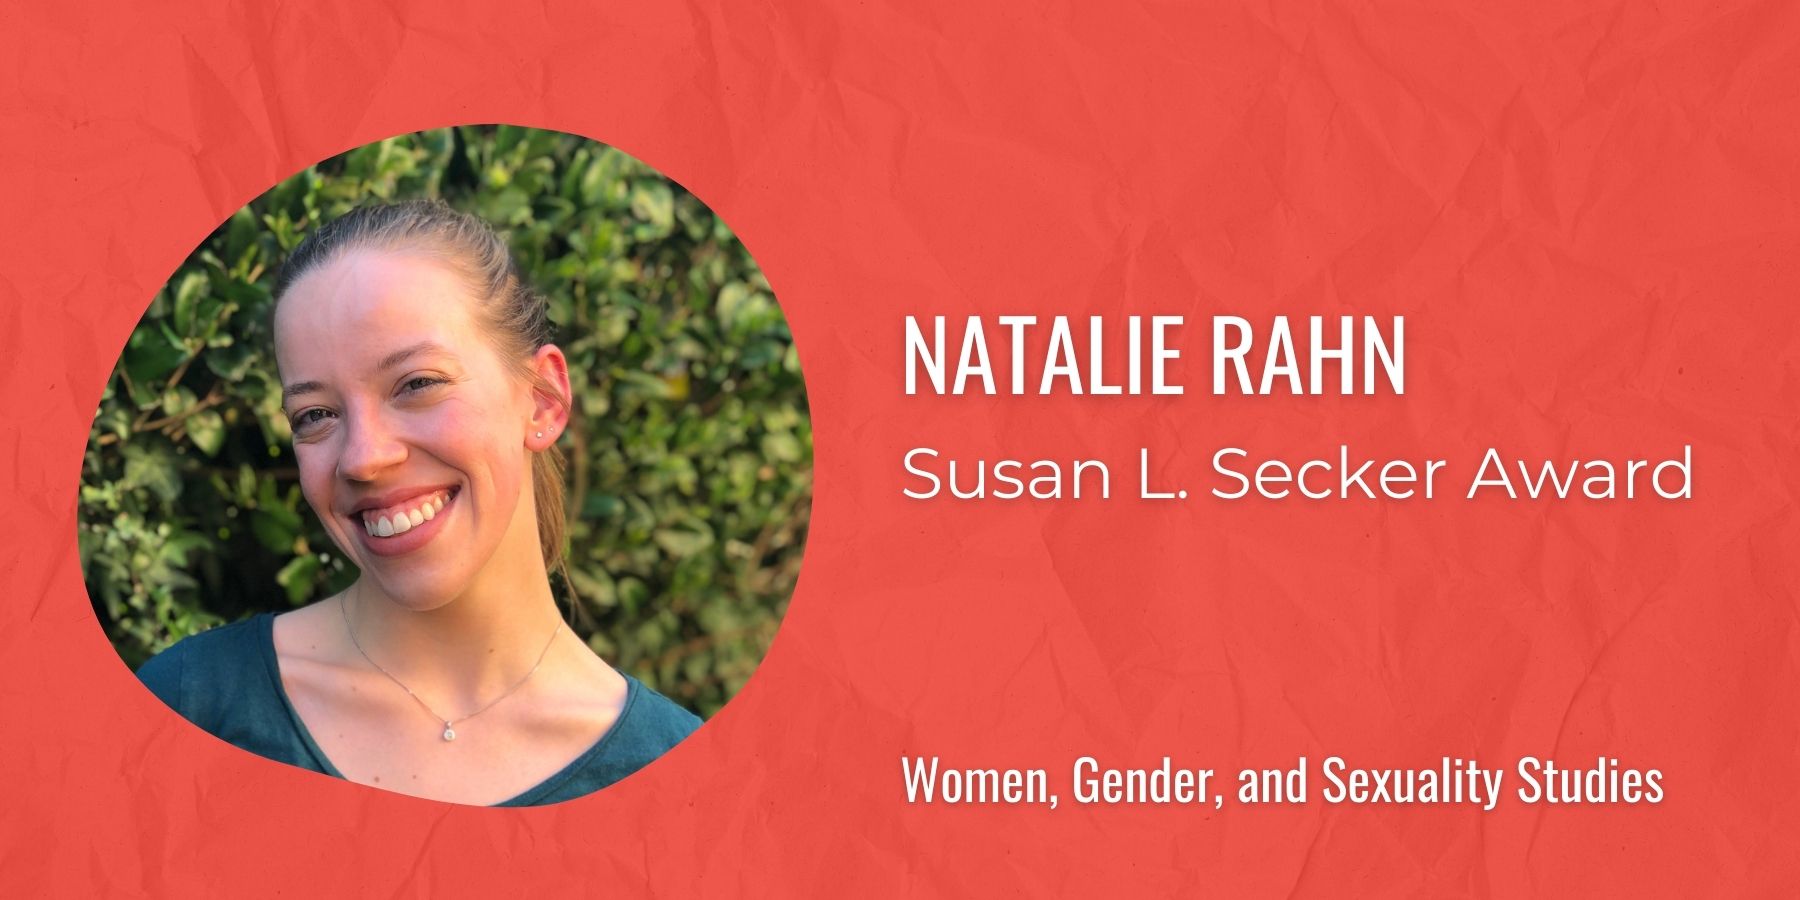 Image of Natalie Rahn with text: Susan L. Secker Award, Women, Gender, and Sexuality Studies
